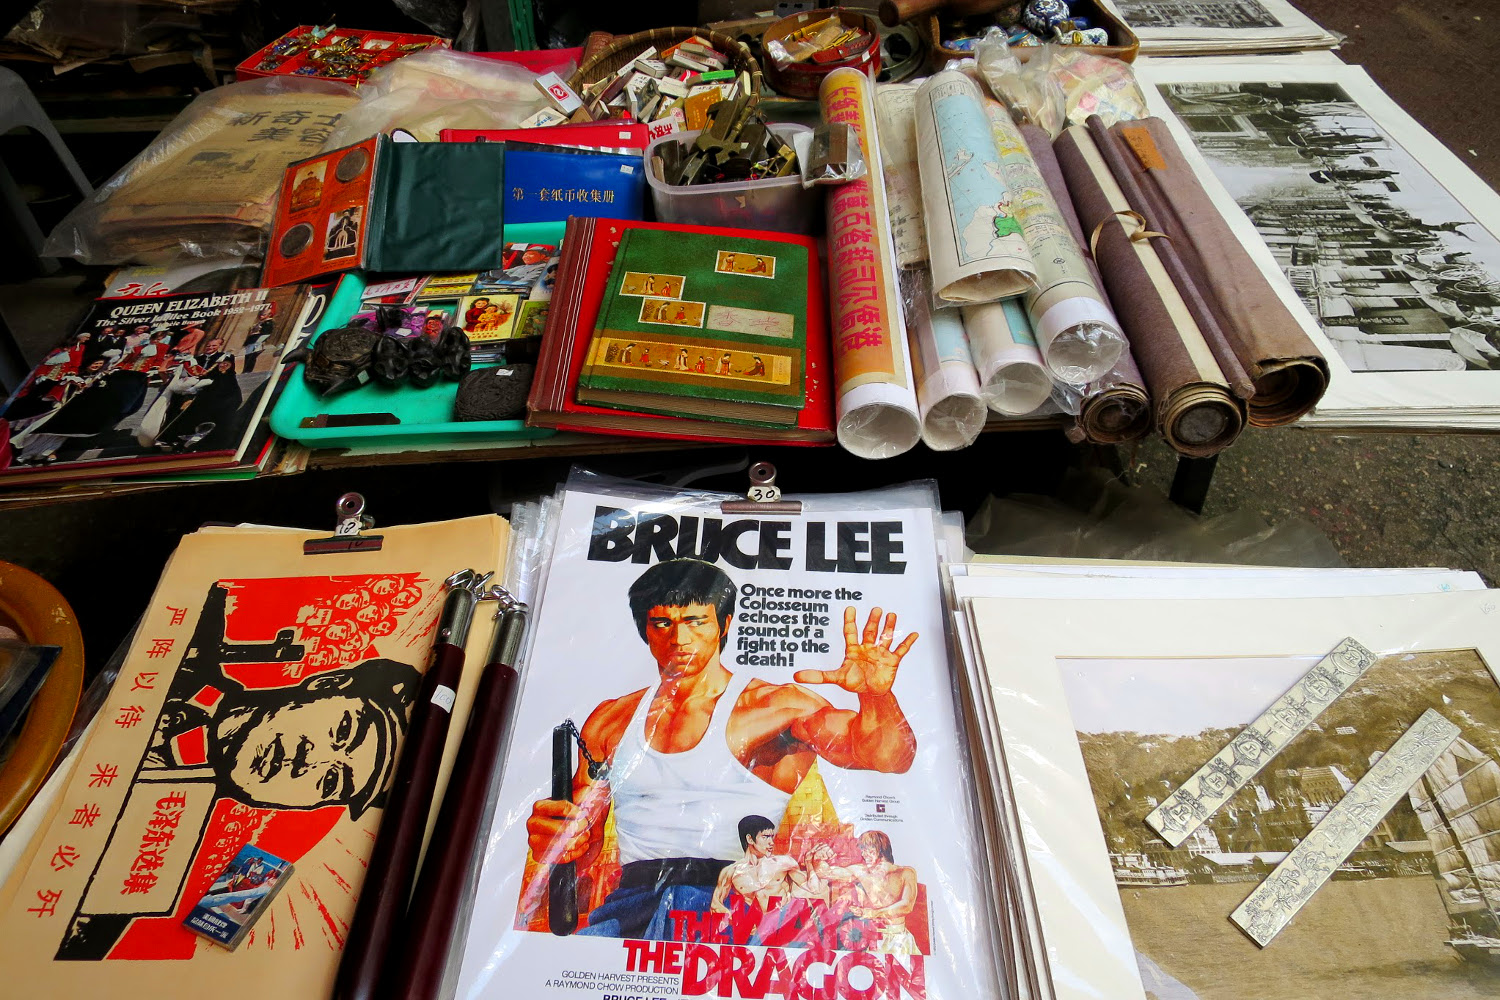 Bric-a-brac and posters for sale along Hollywood Rd. Image by Megan Eaves / londoninfopage